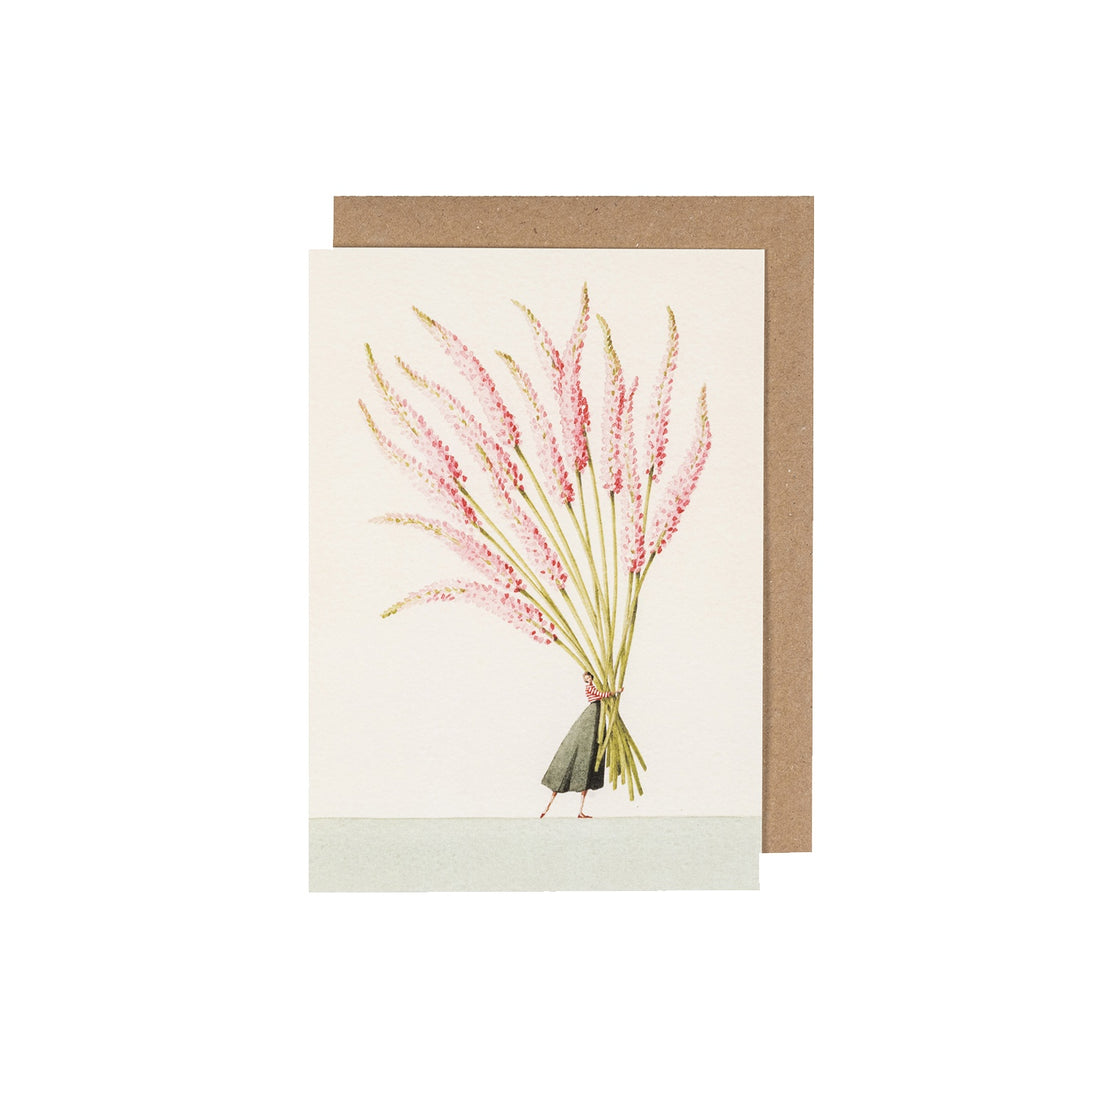 Illustration of a tied bouquet of pink flowers on a Foxtails Greeting Card with a brown envelope behind it, designed by Laura Stoddart for Hester &amp; Cook.